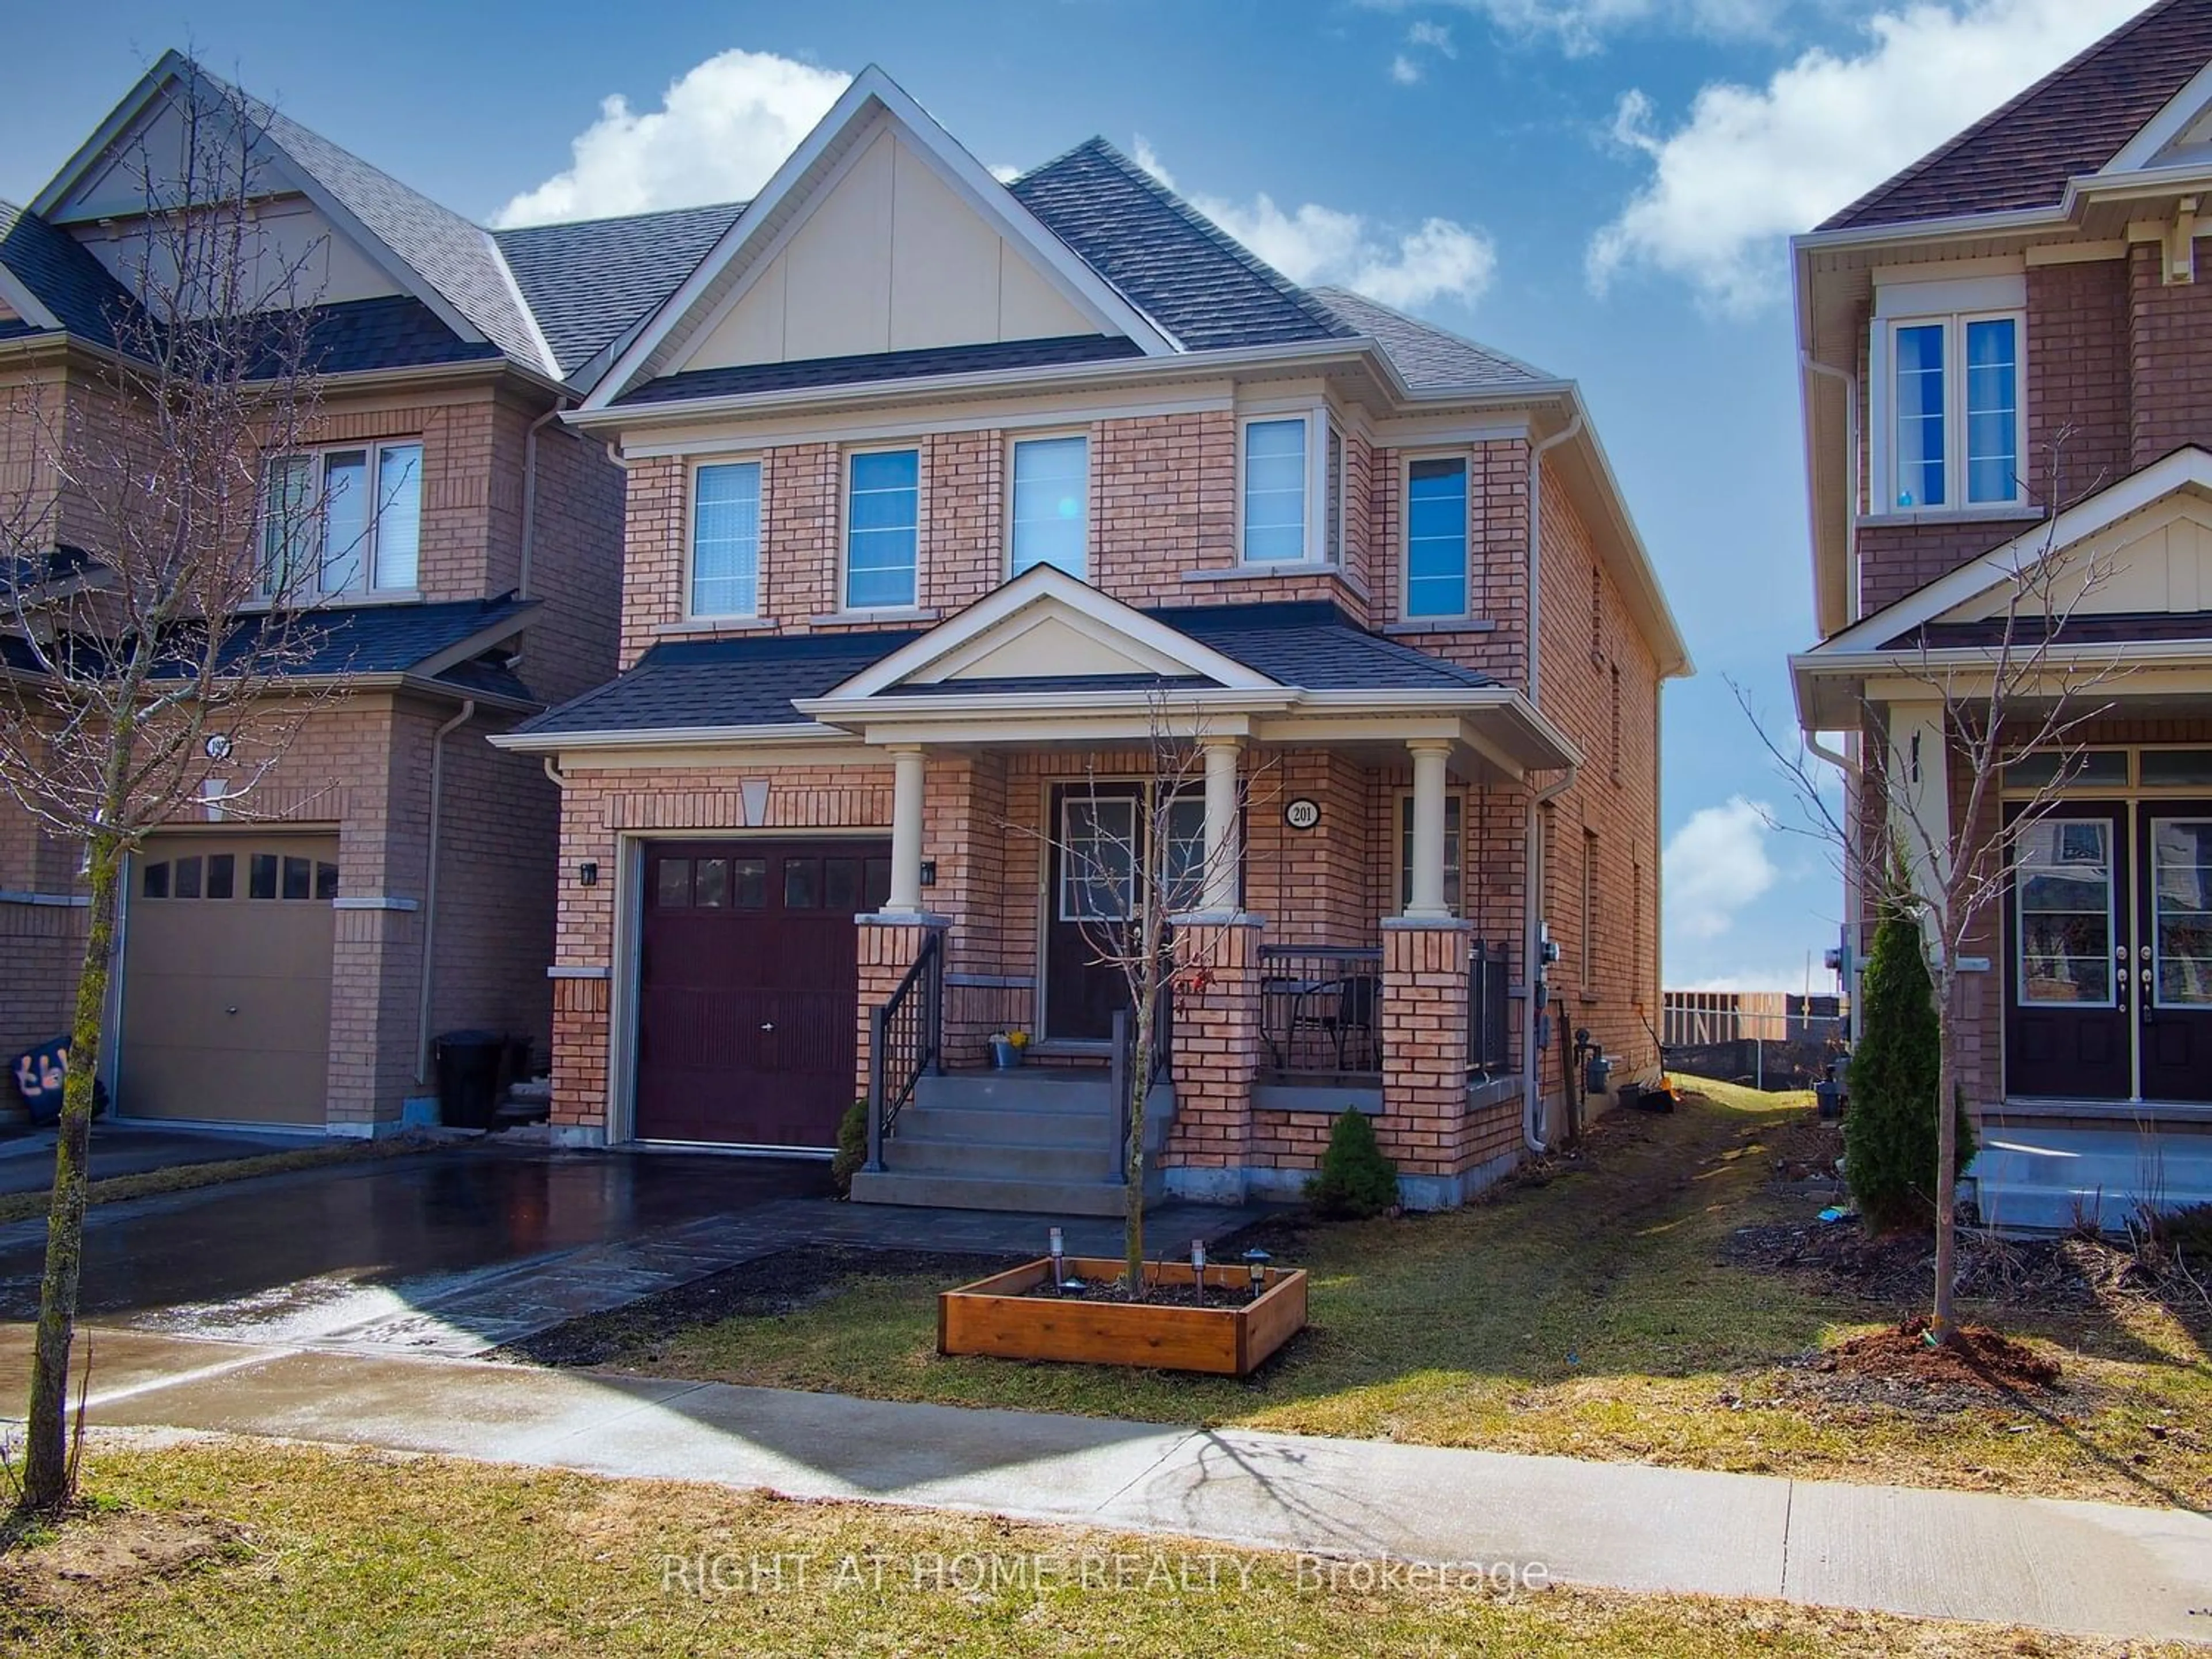 Home with brick exterior material for 201 South Ocean Dr, Oshawa Ontario L1L 0K4